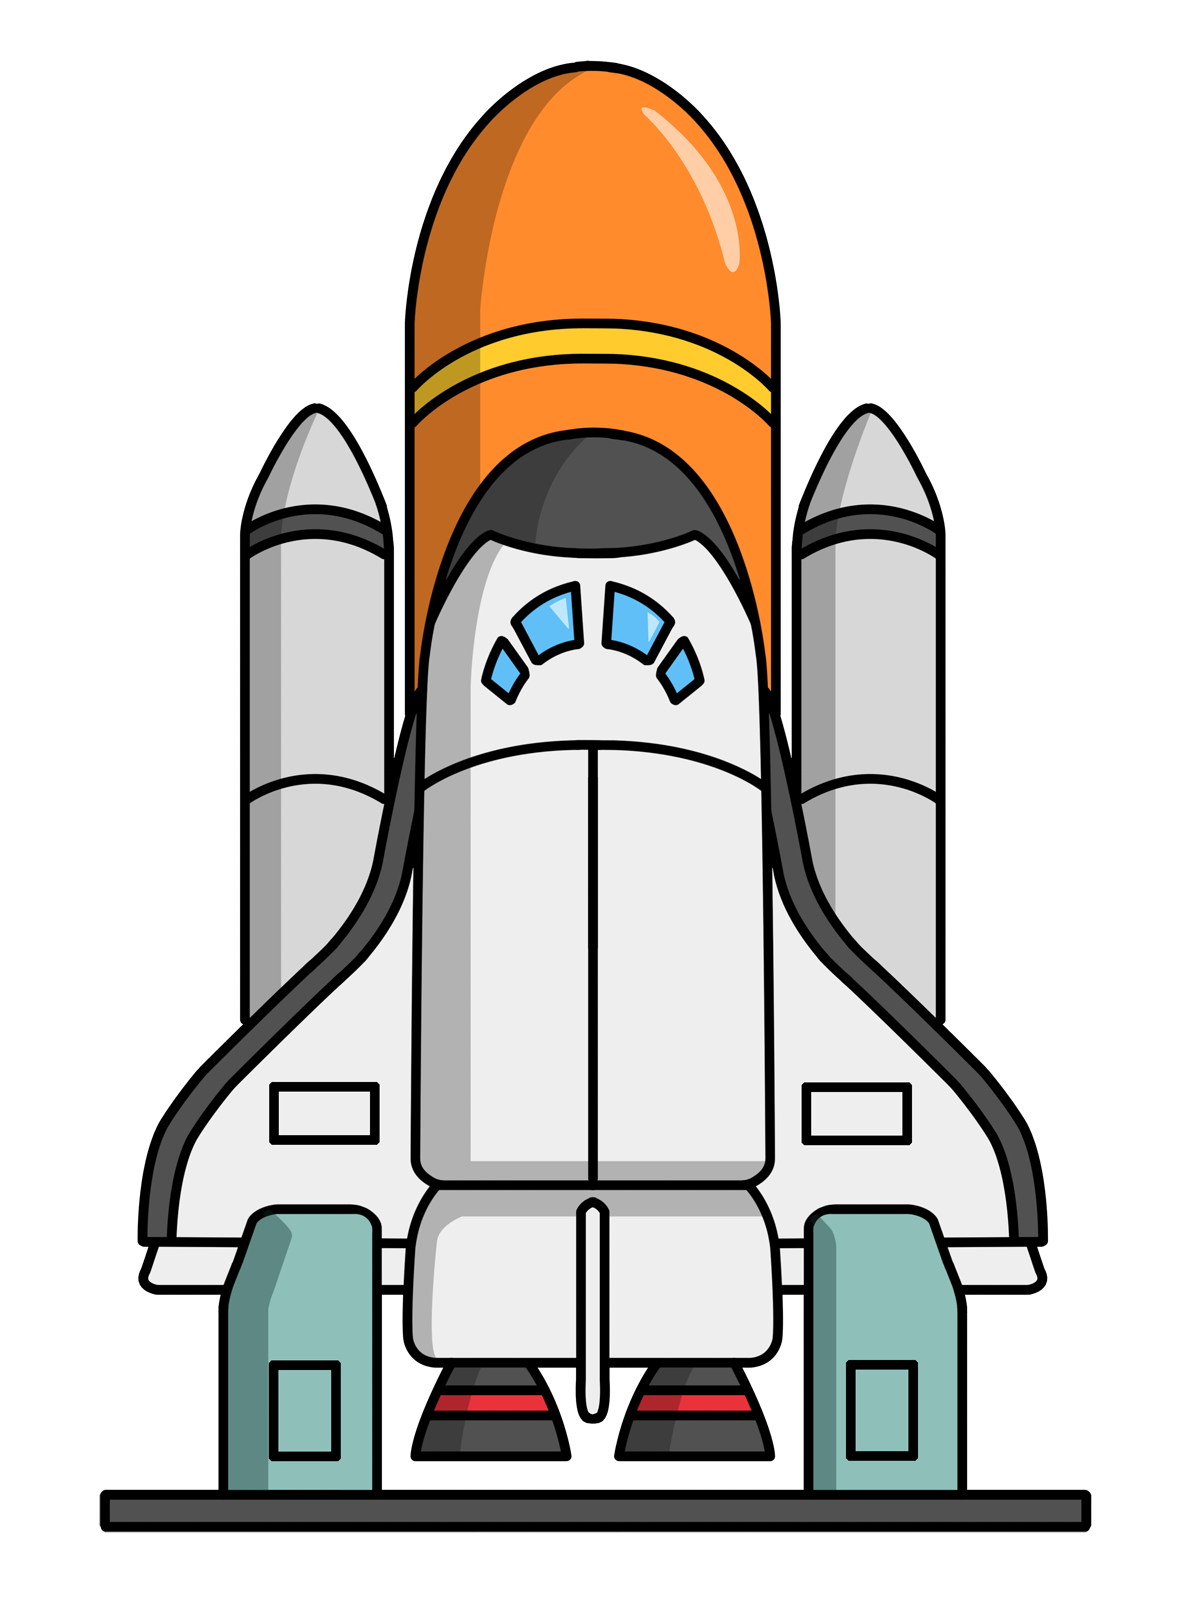 Space Shuttle Clip Art   Images   Free For Commercial Use